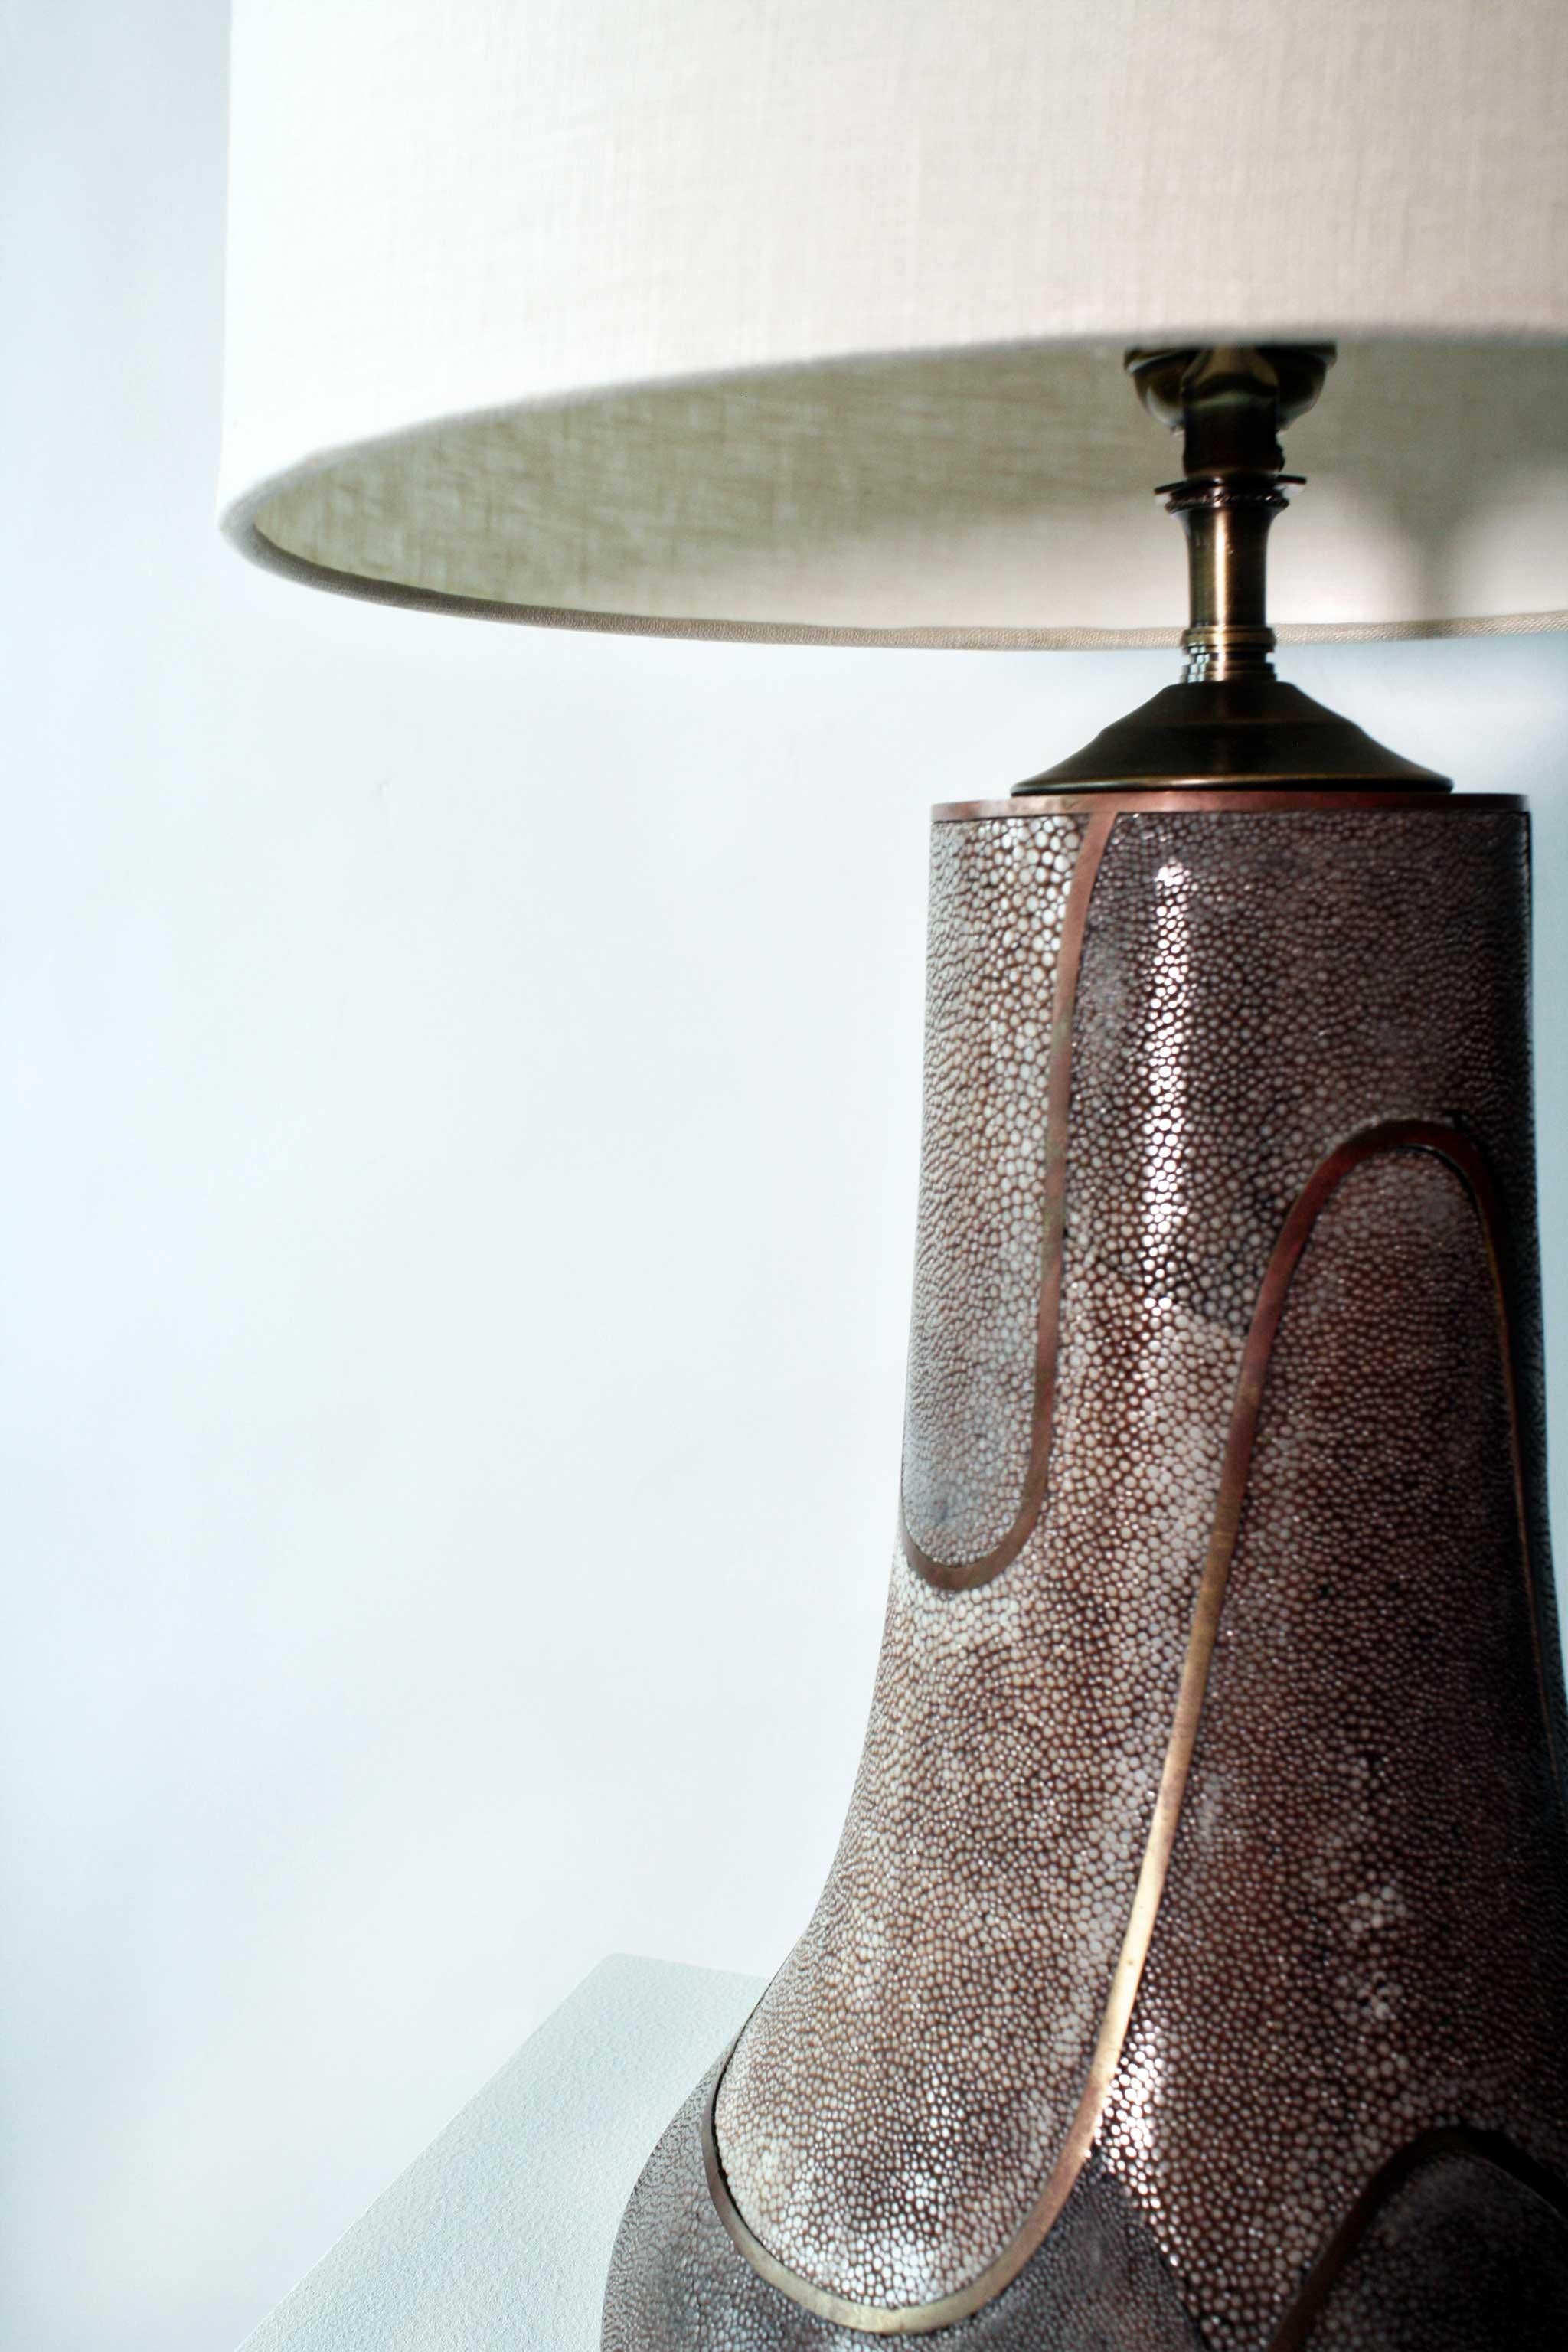 Shagreen Table Lamp, Light Mauve & Bronze, Circa Late 20th Century.

One-of-a-kind stingray shagreen table lamp with intricate bronze curved metal detail. Vintage from the late 20th century, this piece is unique, rare, and traditionally handmade